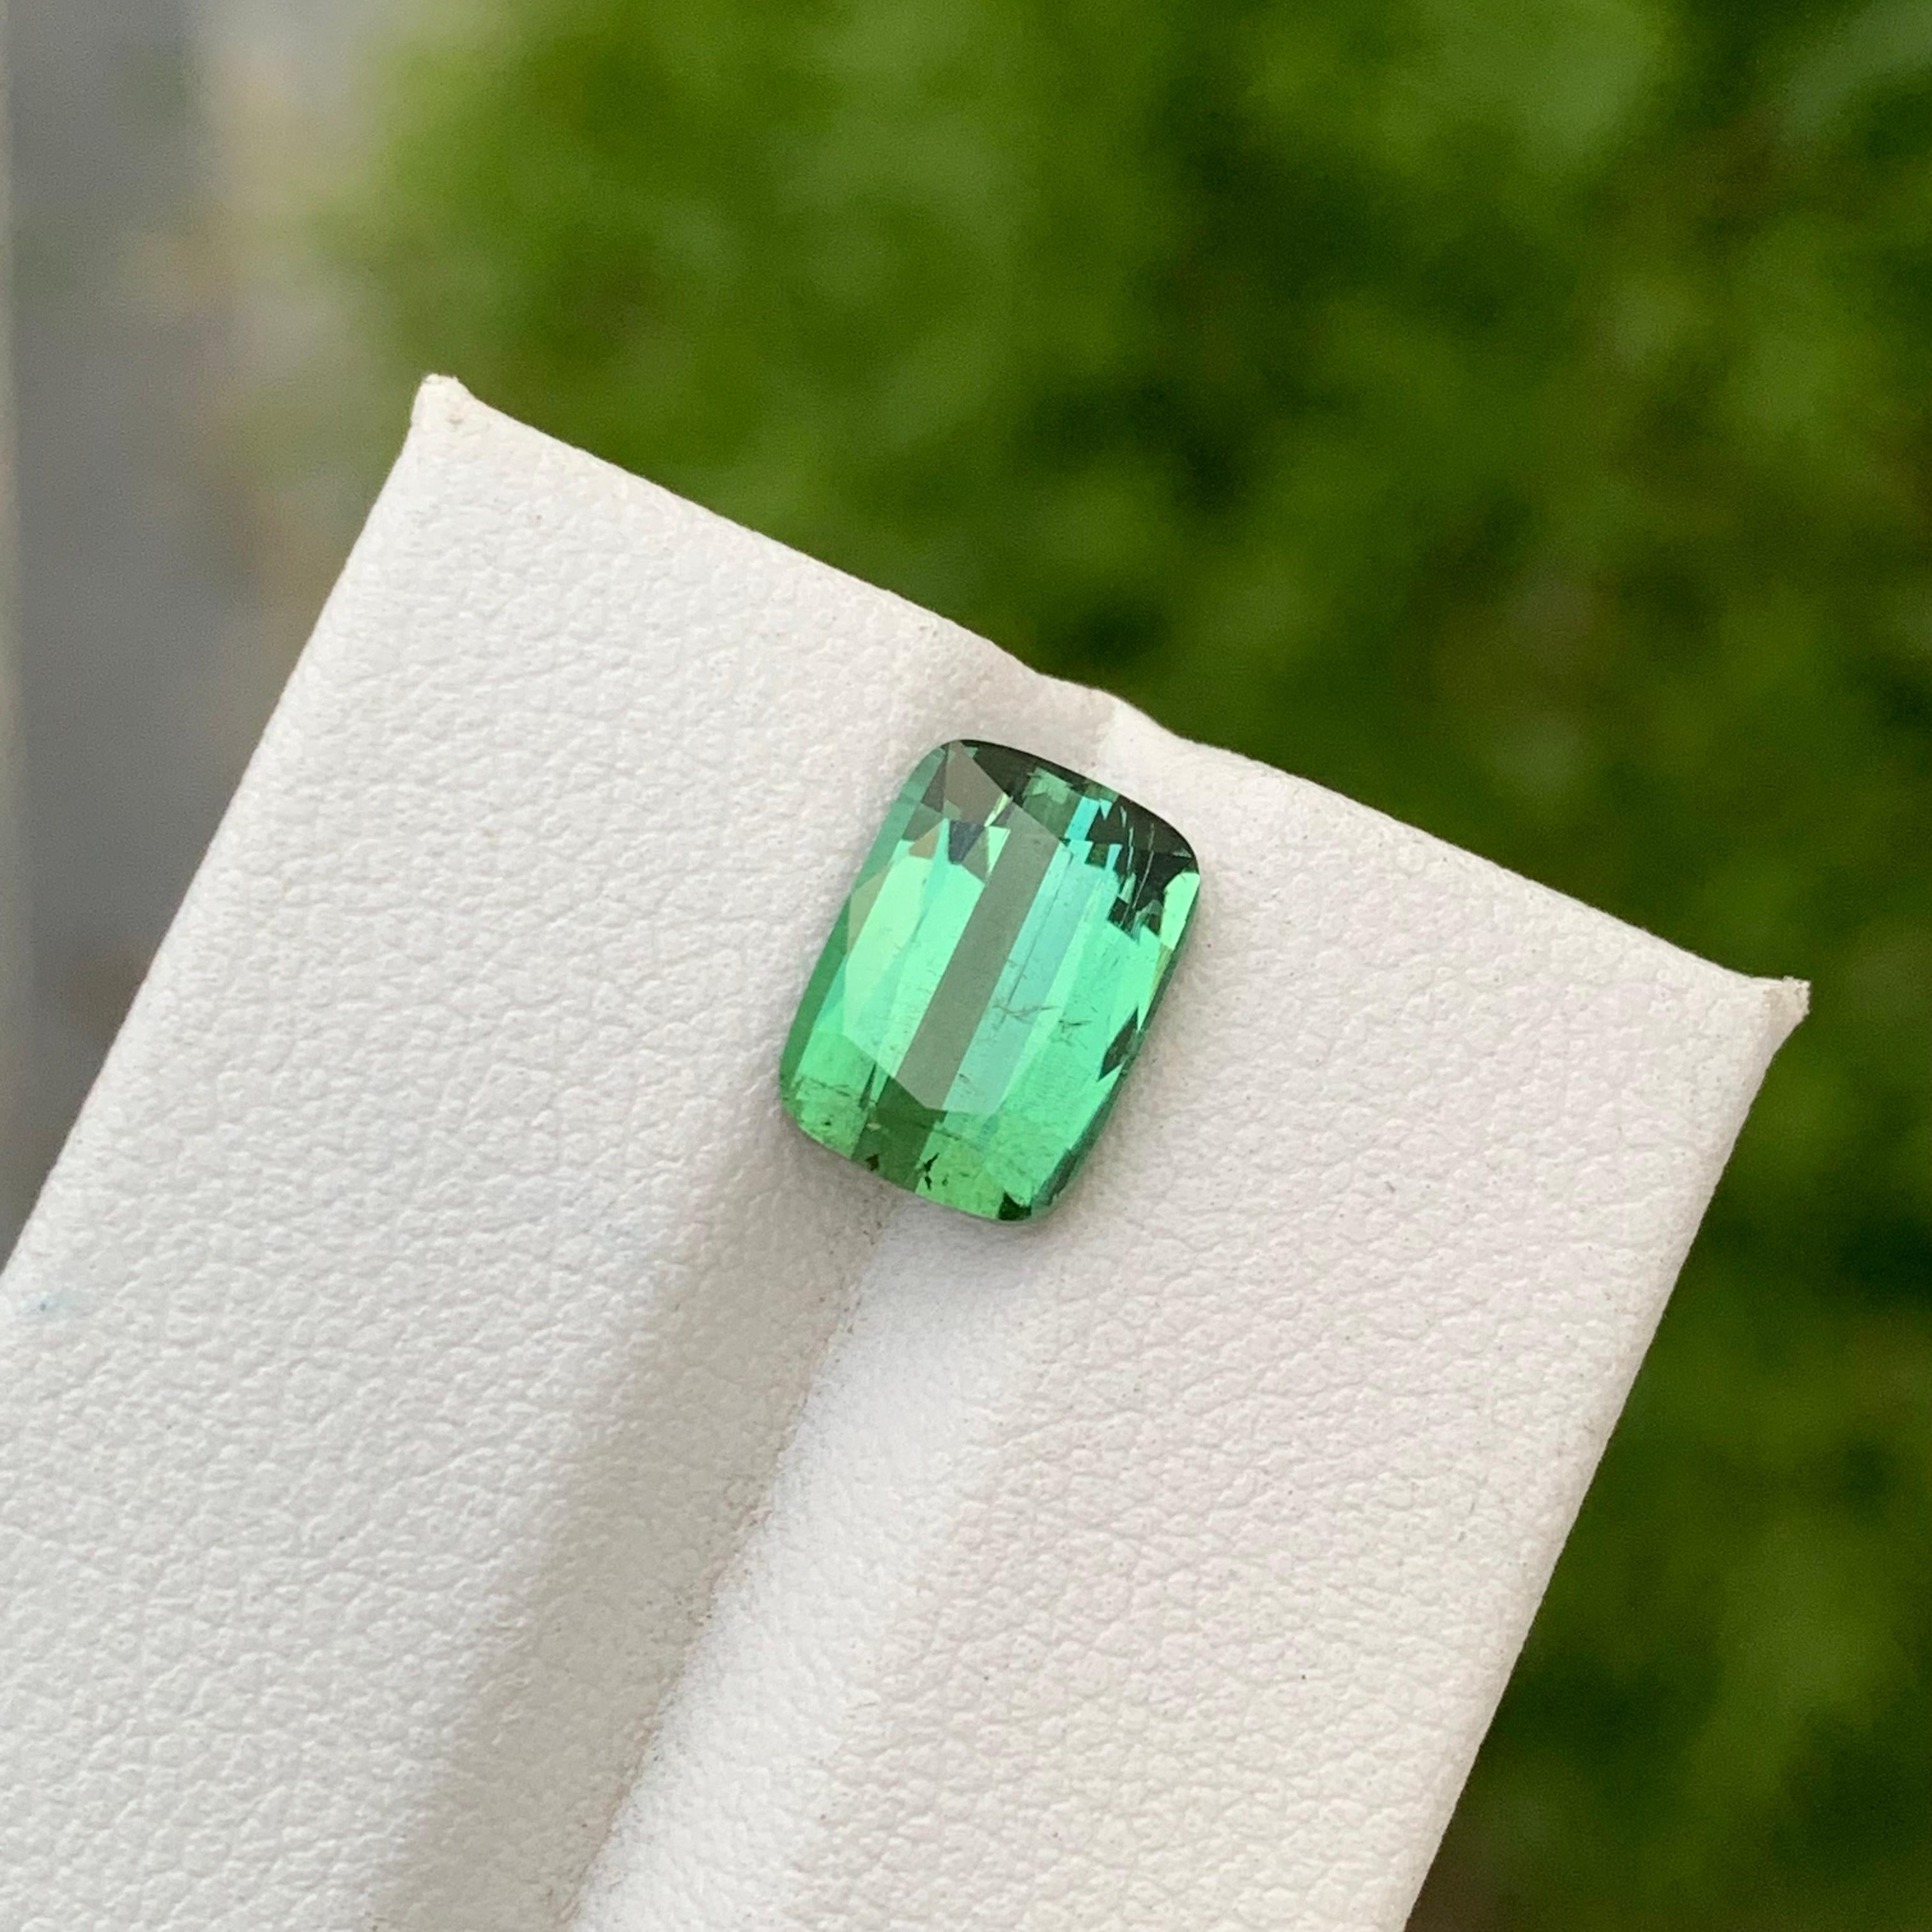 Loose Tourmaline 
Weight: 3.0 Carats 
Dimension: 9.5x7x5 Mm
Origin: Kunar Afghanistan 
Shape: Cushion
Color: Mint Green
Treatment: Non
Certificate: On Demand
Tourmaline is a gemstone with a remarkable spectrum of colors, showcasing an unparalleled